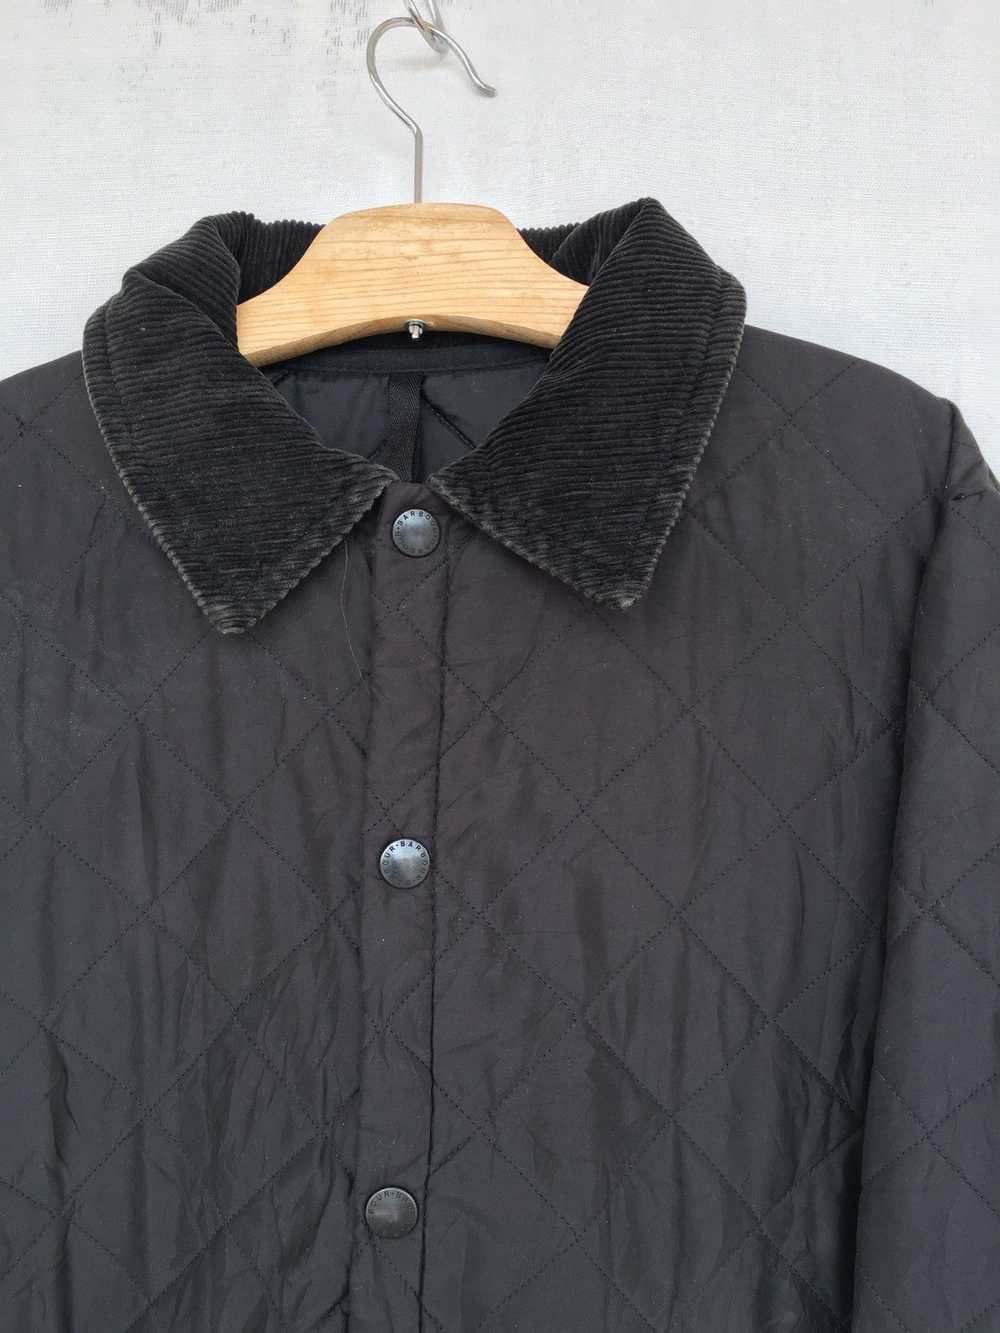 Barbour quilted jacket - image 2